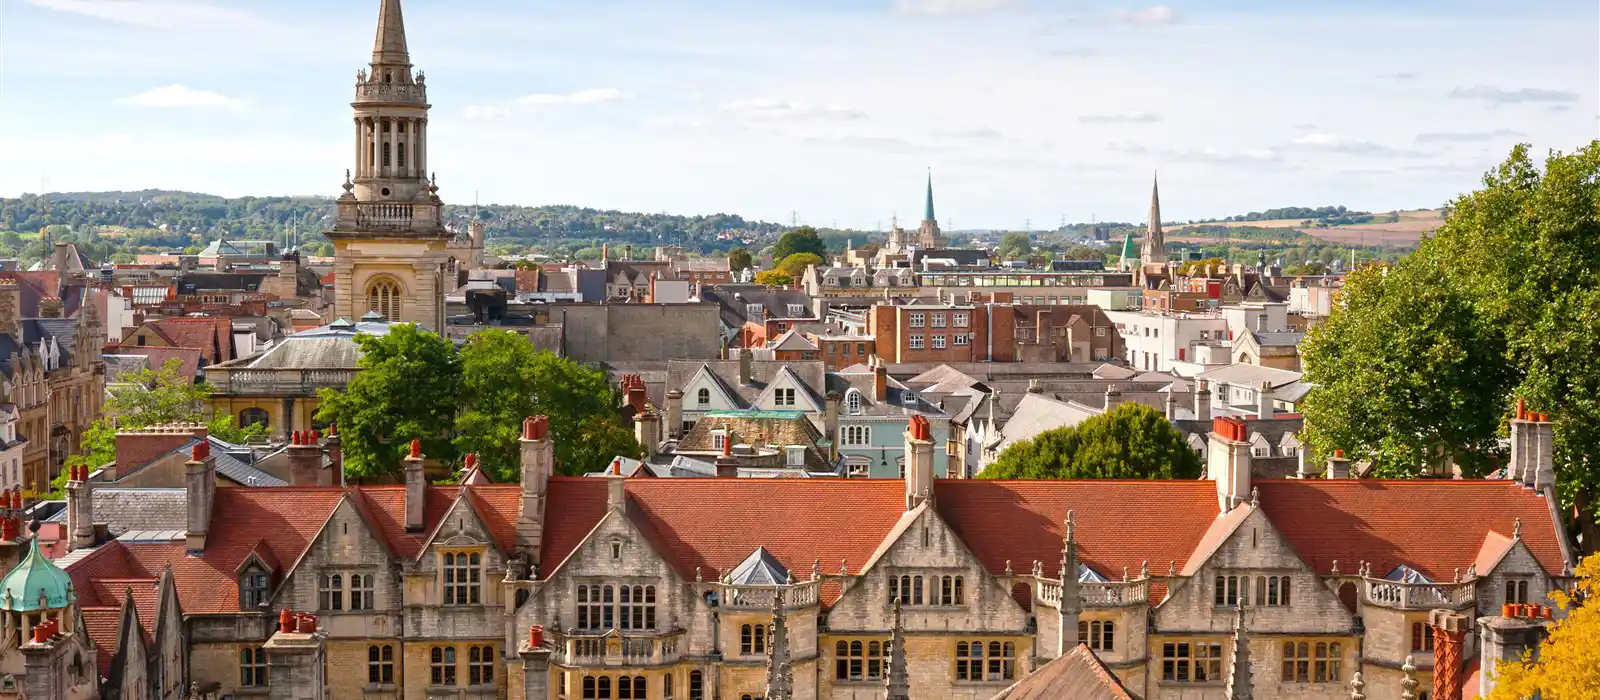 View over Oxford